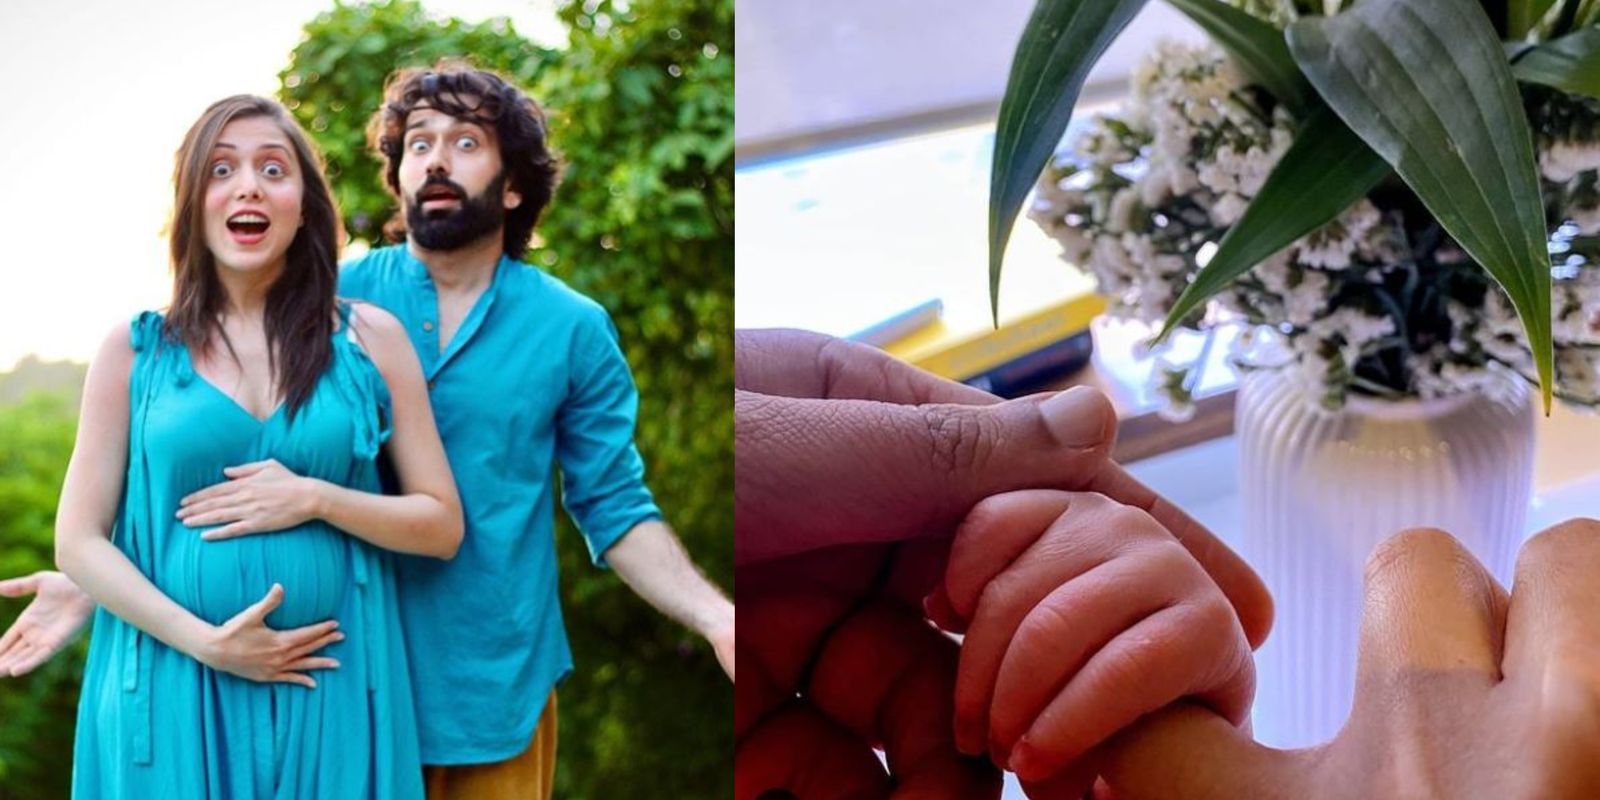 Ishqbaaz Actor Nakuul Mehta And Wife Jankee Parekh Become Parents, Reveal They Are 'Grateful And Sleepy In Equal Measure'